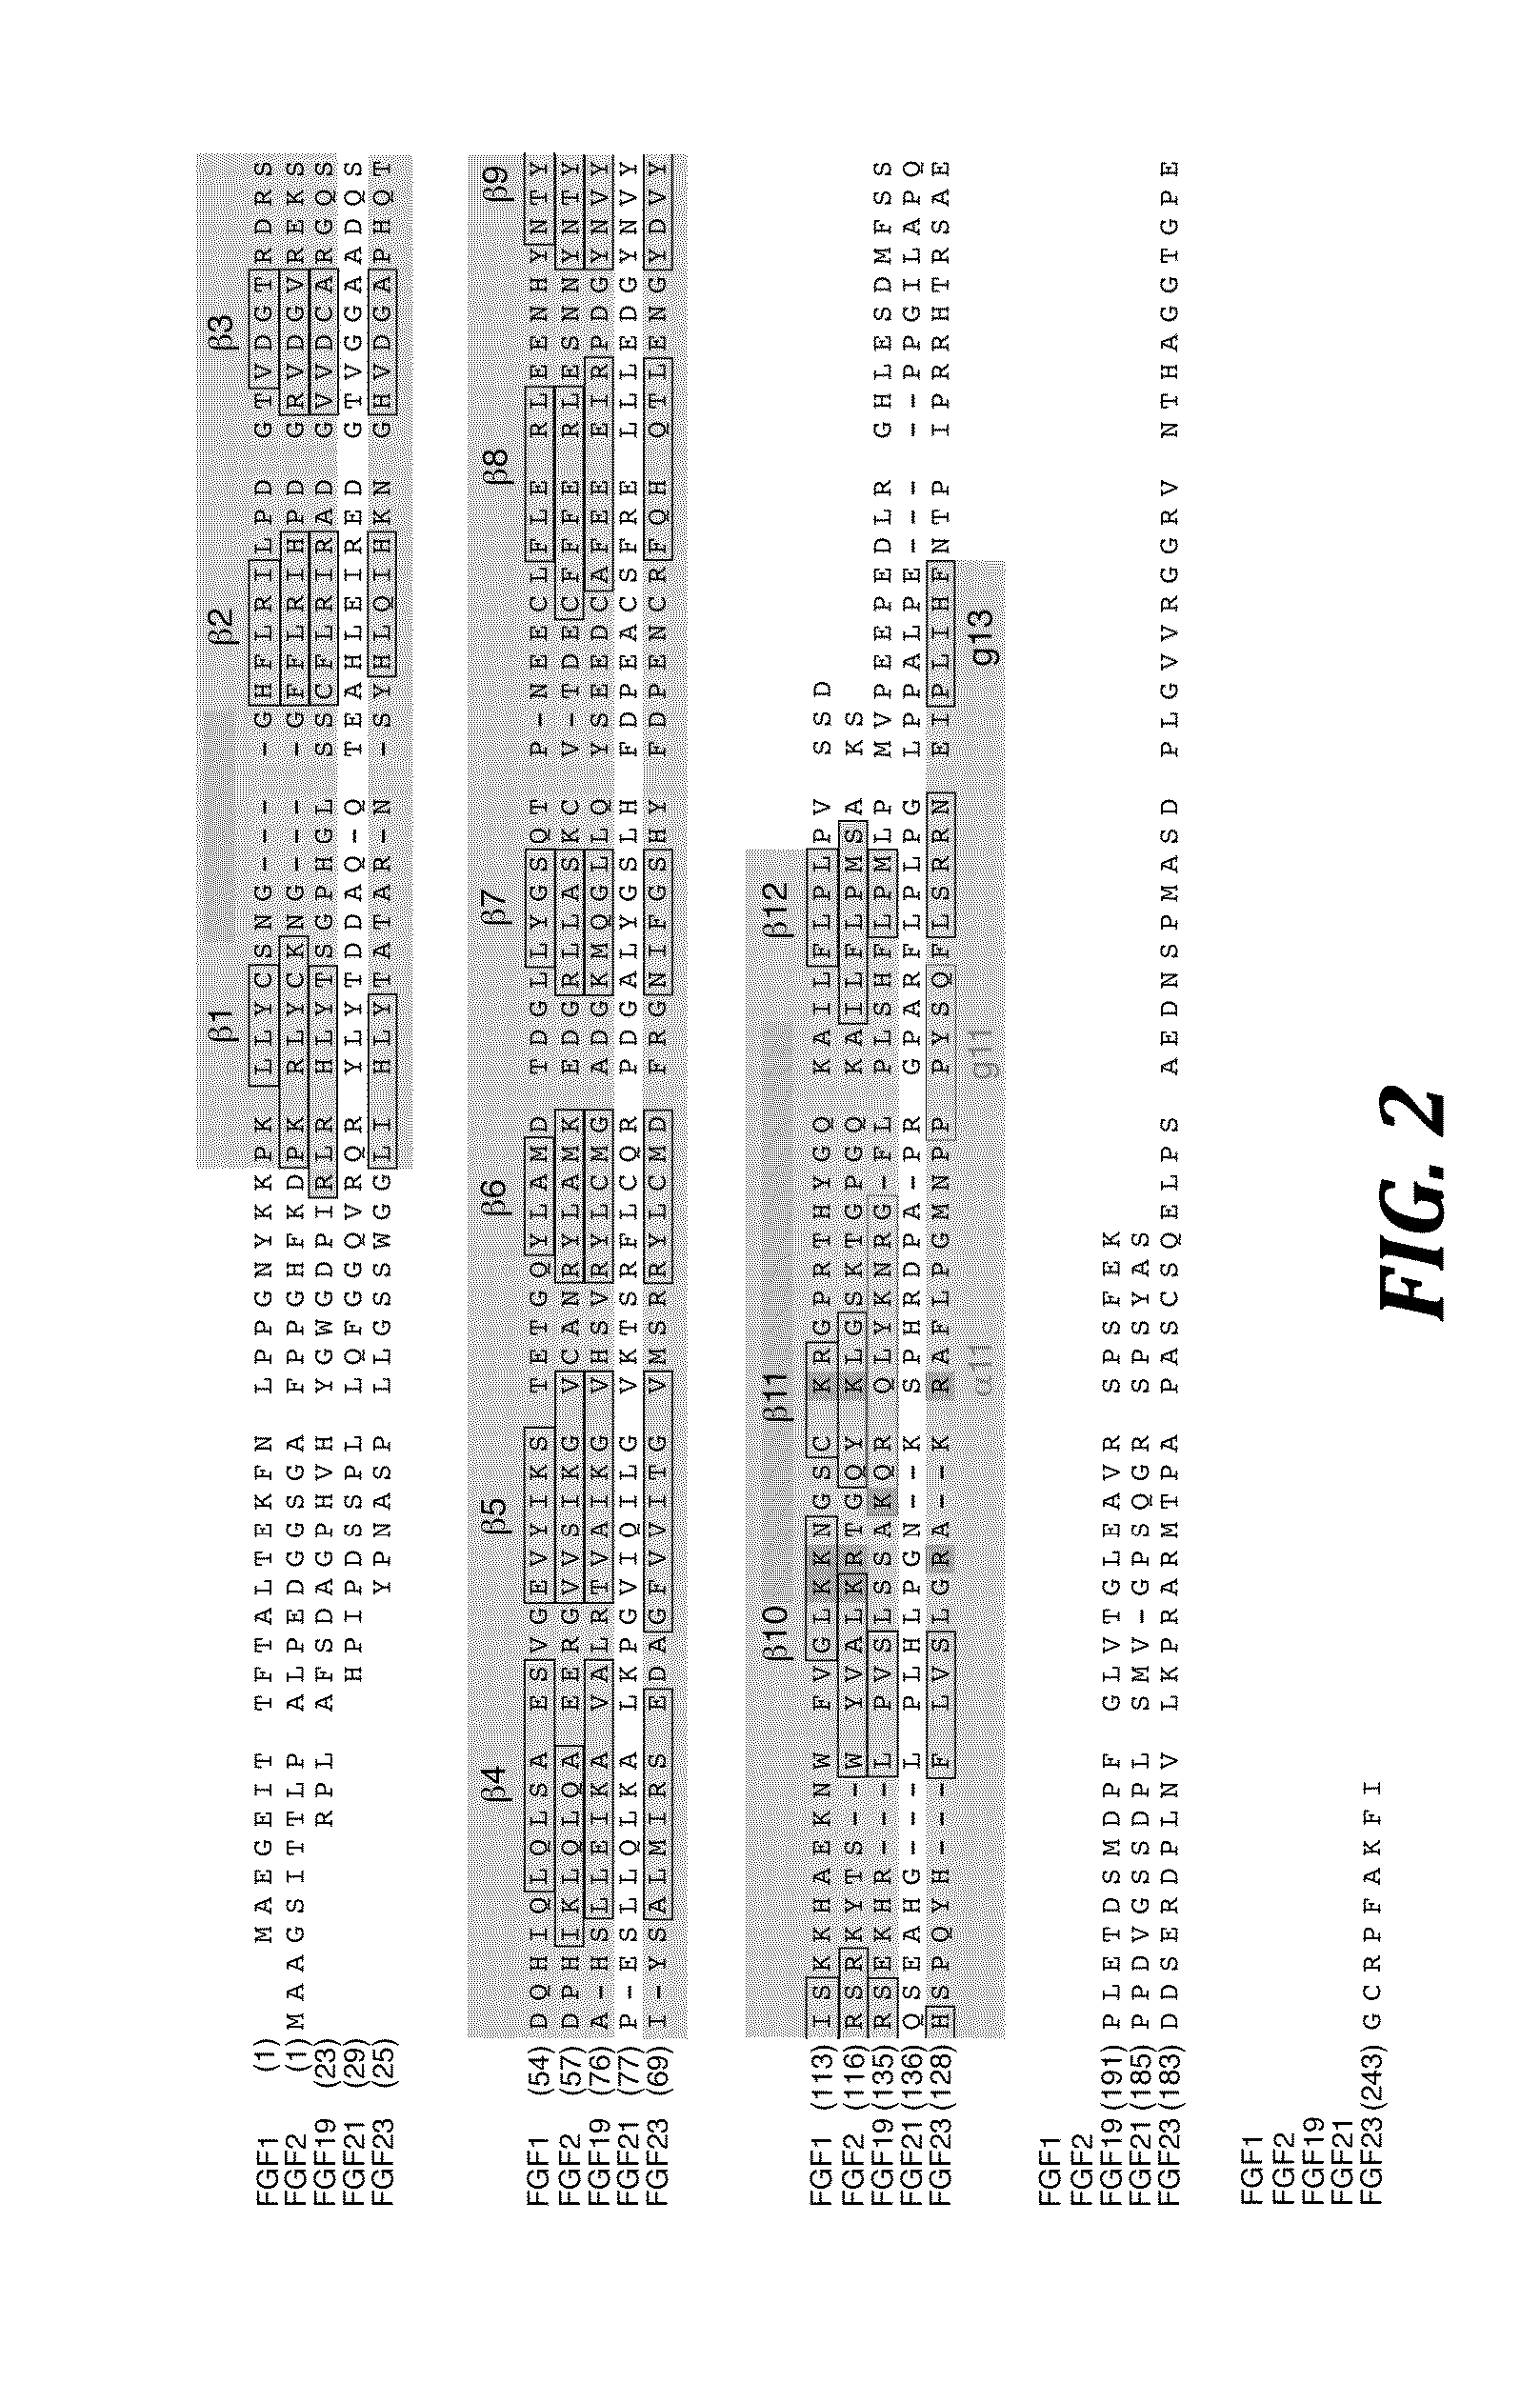 Chimeric fibroblast growth factor 19 proteins and methods of use